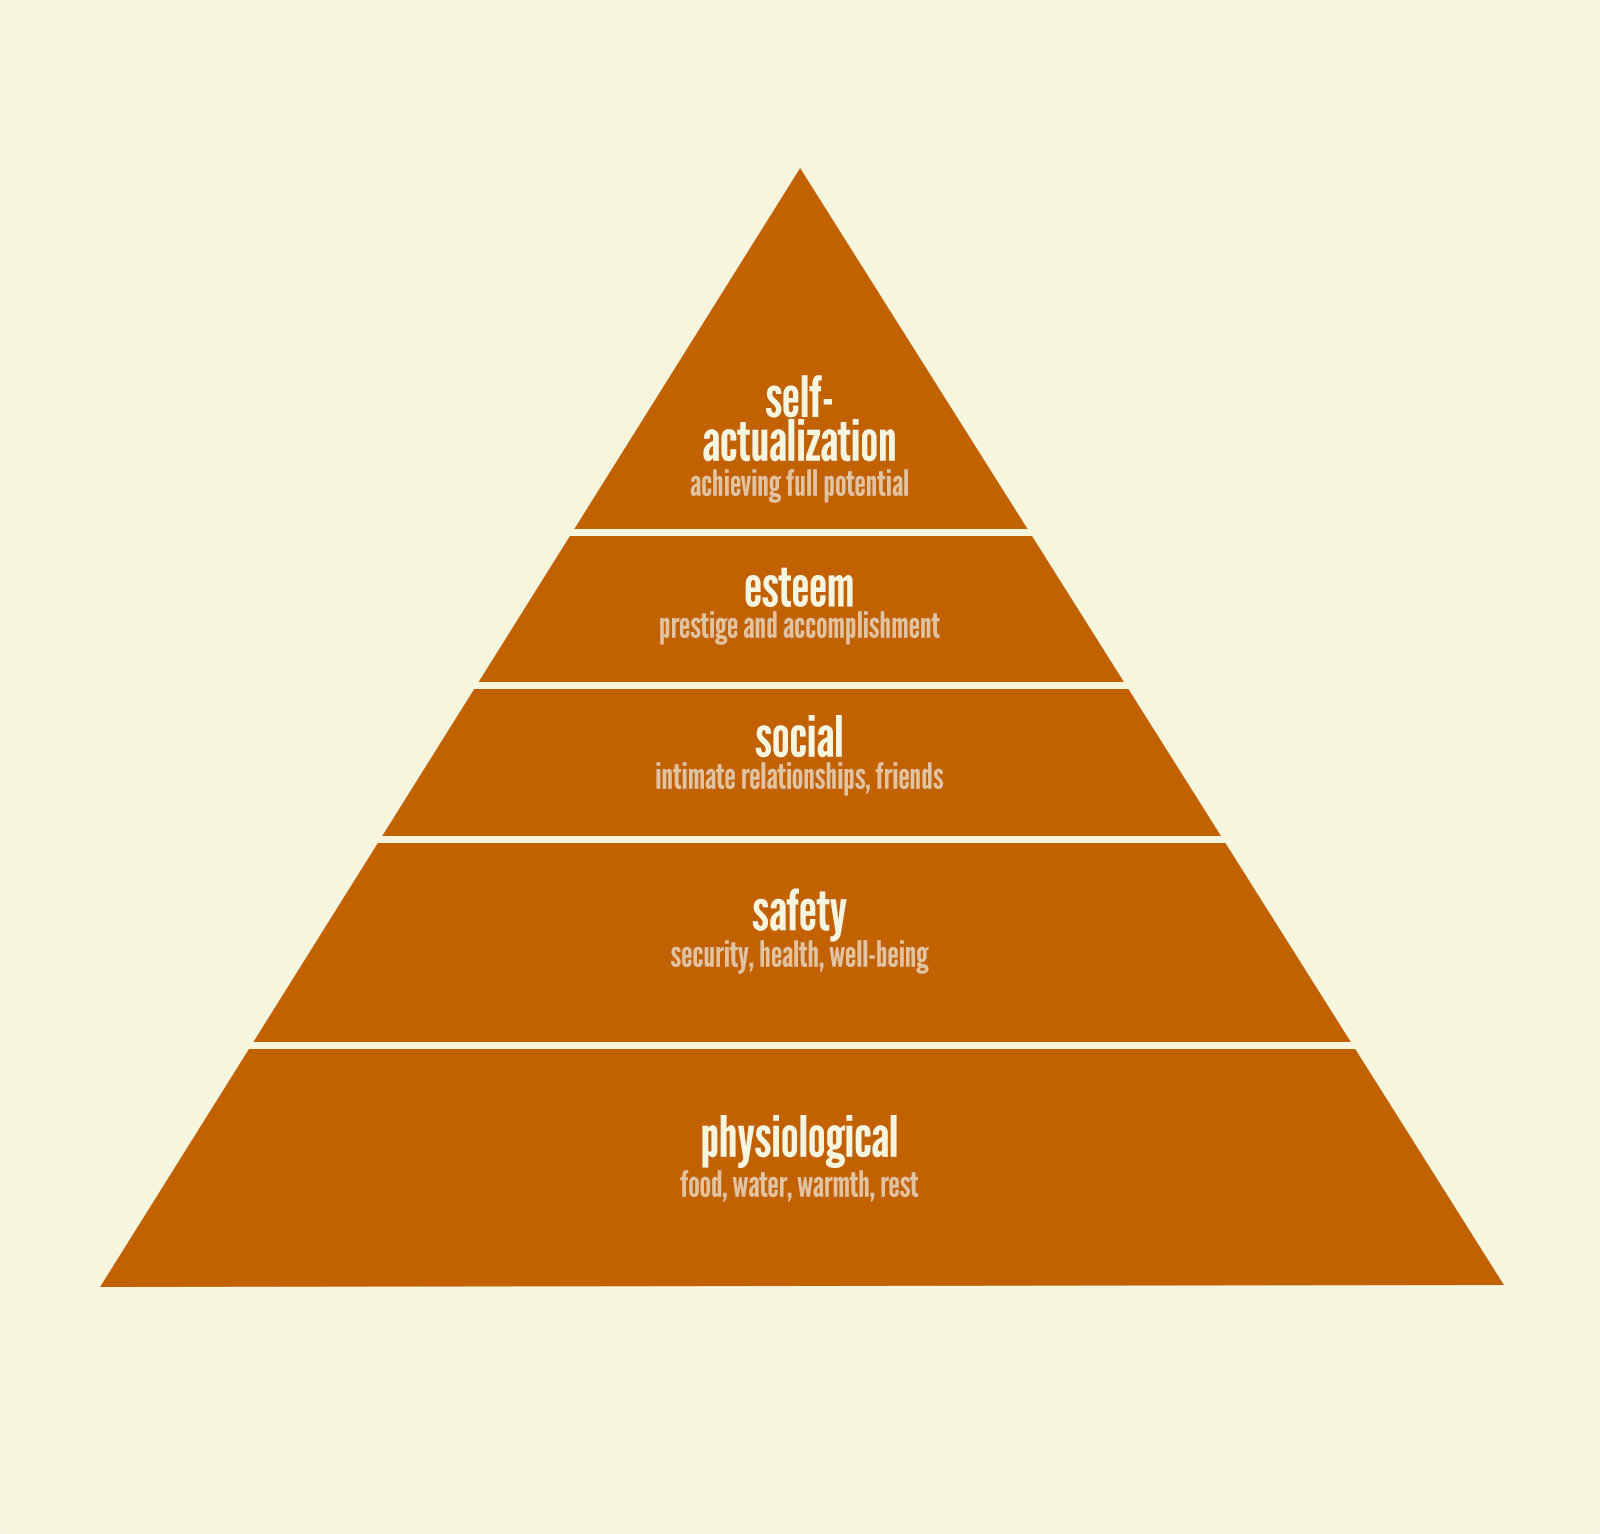 Maslow's Hierarchy of Needs Pyramid: Physiological needs is the base of the pyramid, followed by Safety needs, followed by Social needs, followed by Esteem needs, followed by Self-actualization needs